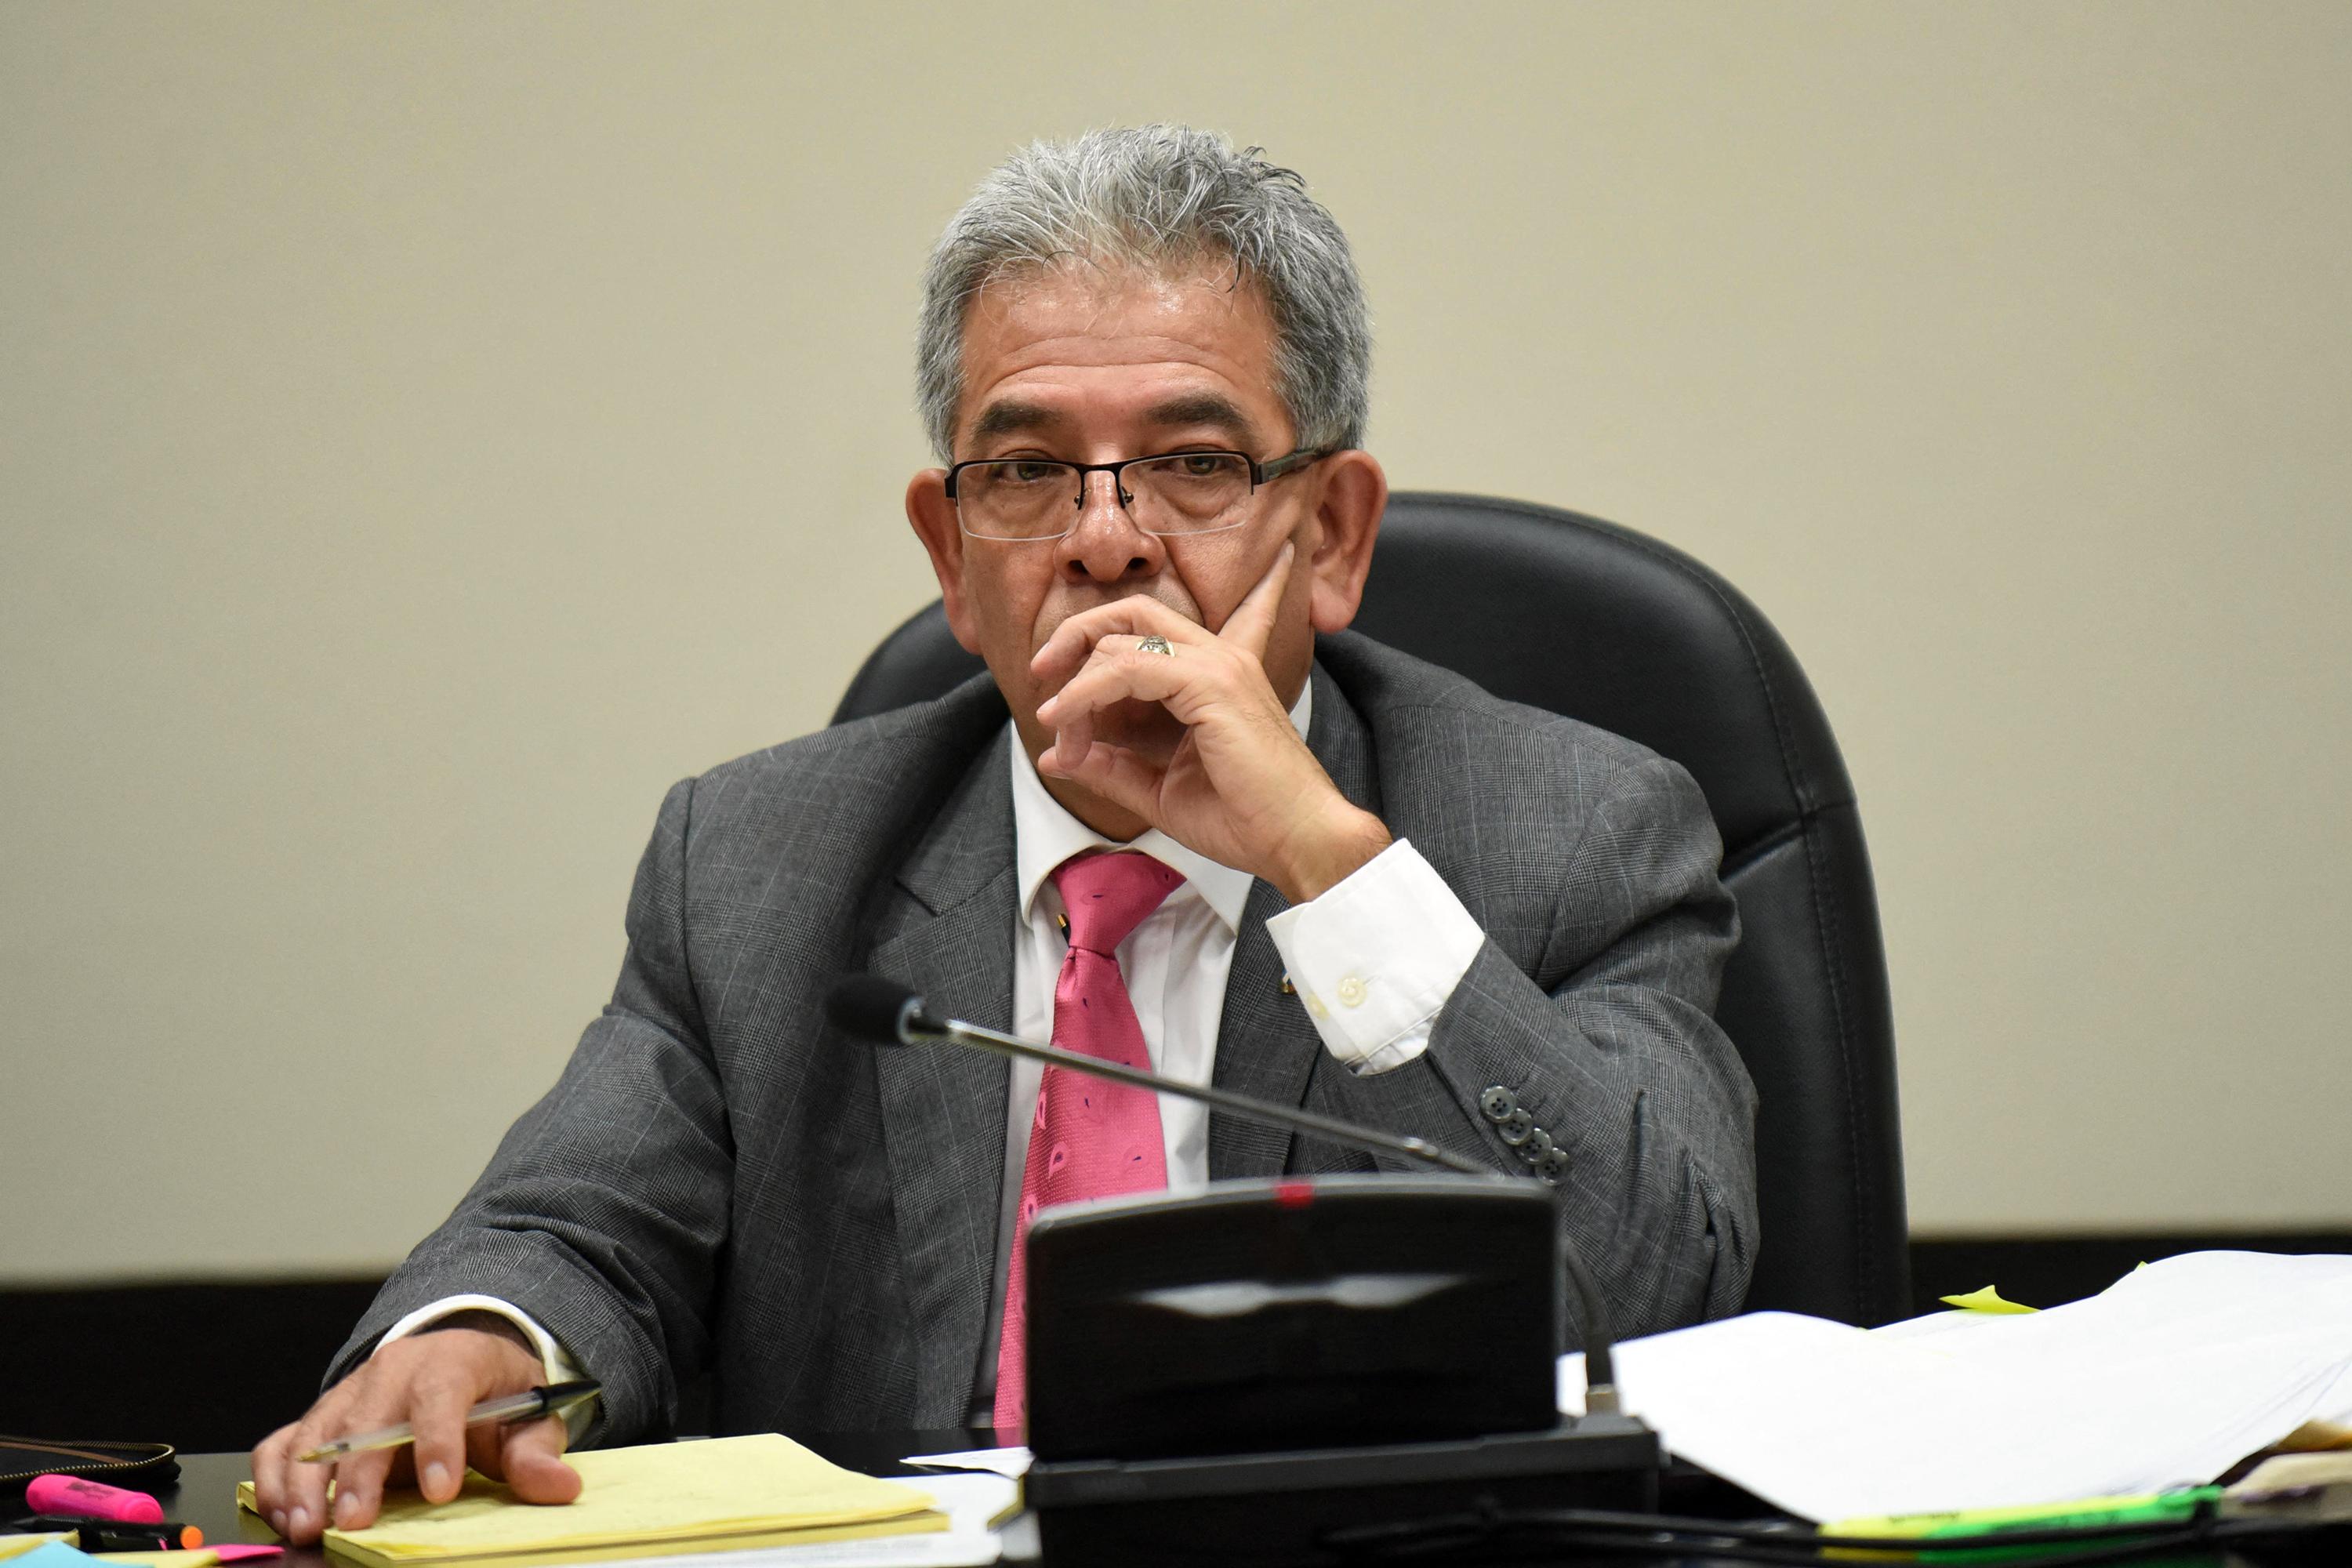 Judge Miguel Ángel Gálvez during the trial of former Guatemalan Vice President Roxana Baldetti, who was arrested on corruption charges in Guatemala City on August 24, 2015. Prosecutors and officials from a UN investigative commission uncovered extensive evidence implicating Baldetti and President Otto Pérez Molina in a massive and highly organized scheme to reduce customs duties for importers in exchange for bribes. Photo: Johan Ordóñez/AFP